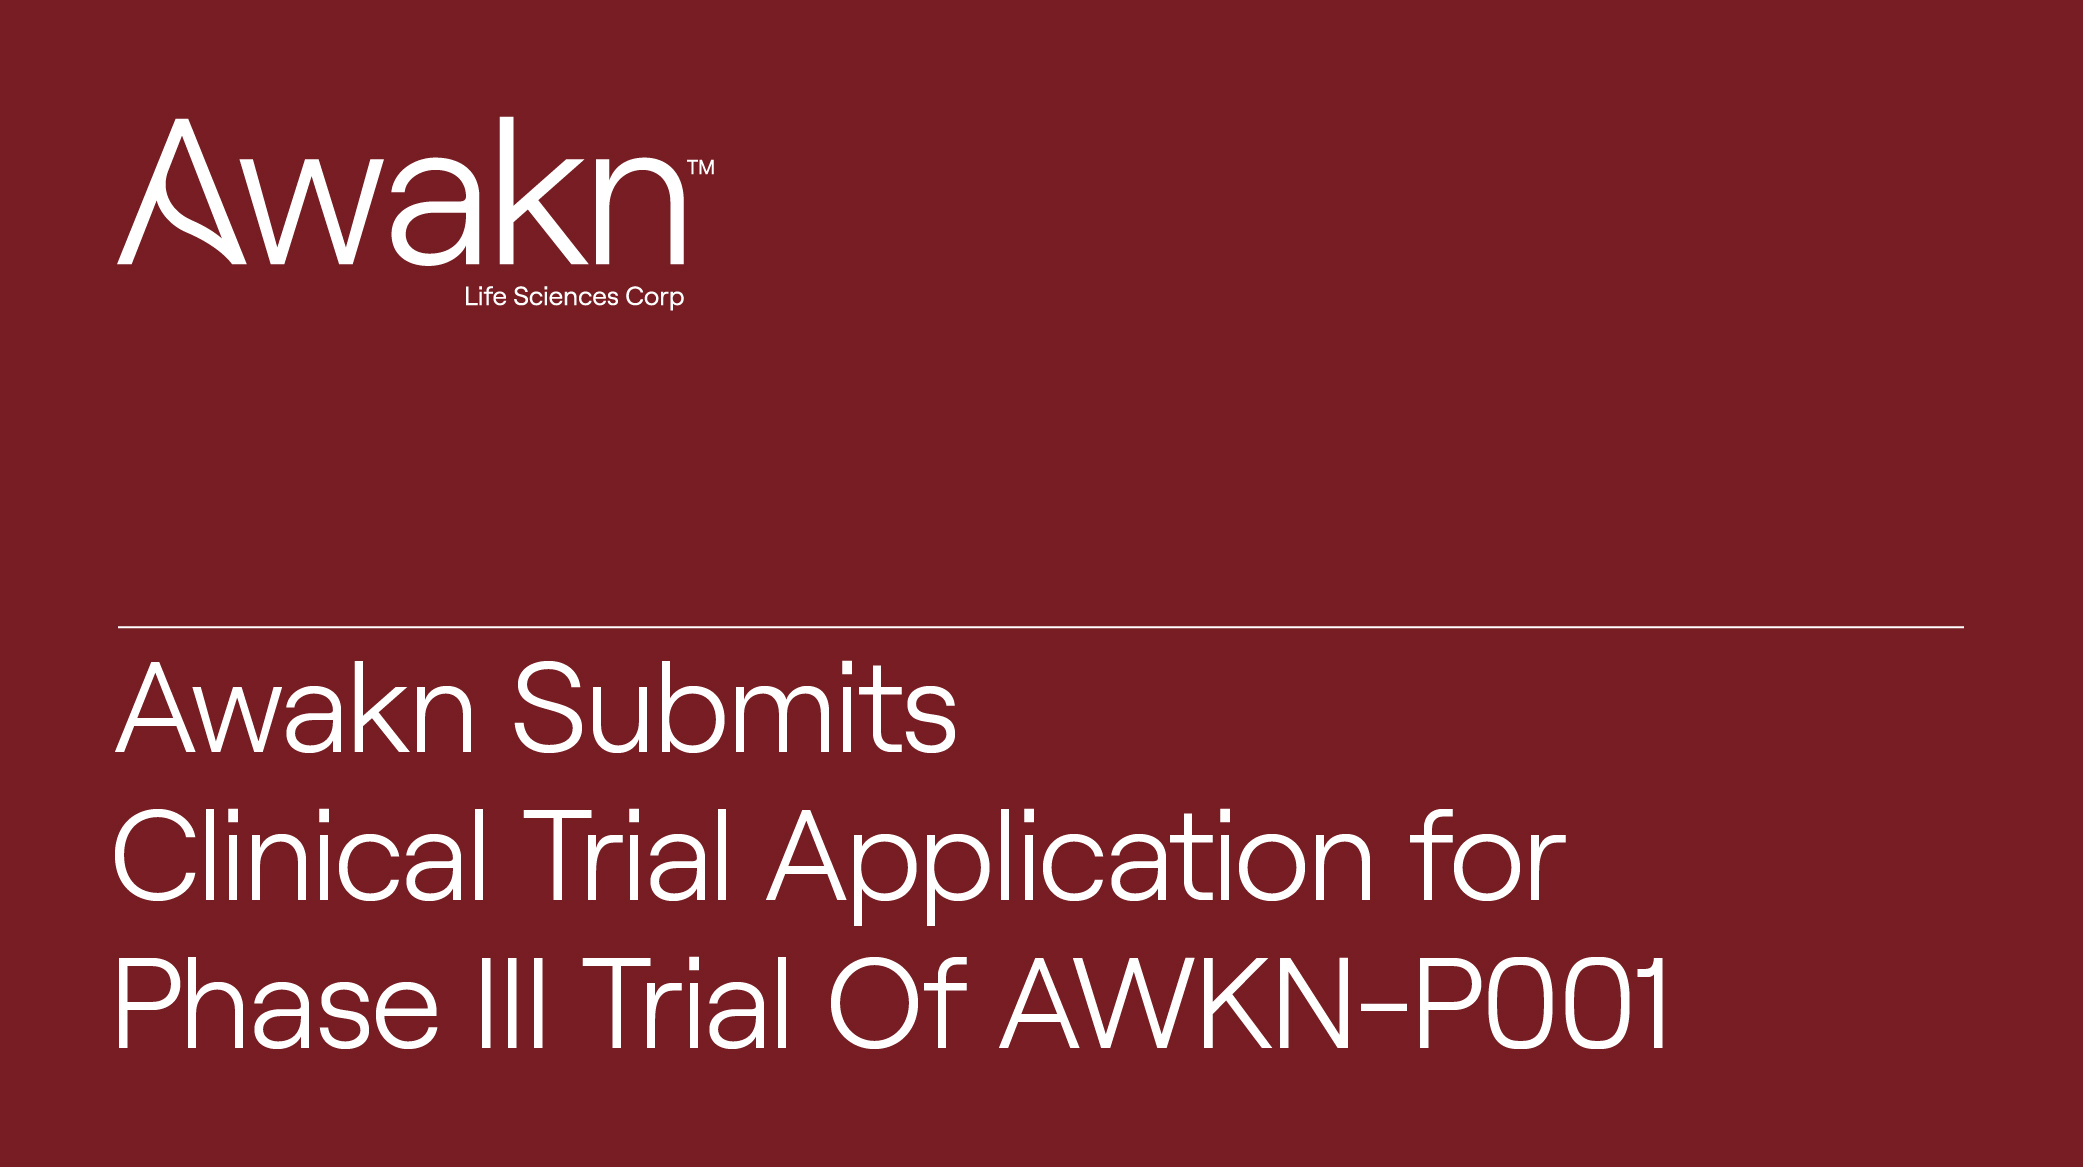 Awakn Life Sciences Submits Clinical Trial Application for Phase III Trial Of AWKN-P001